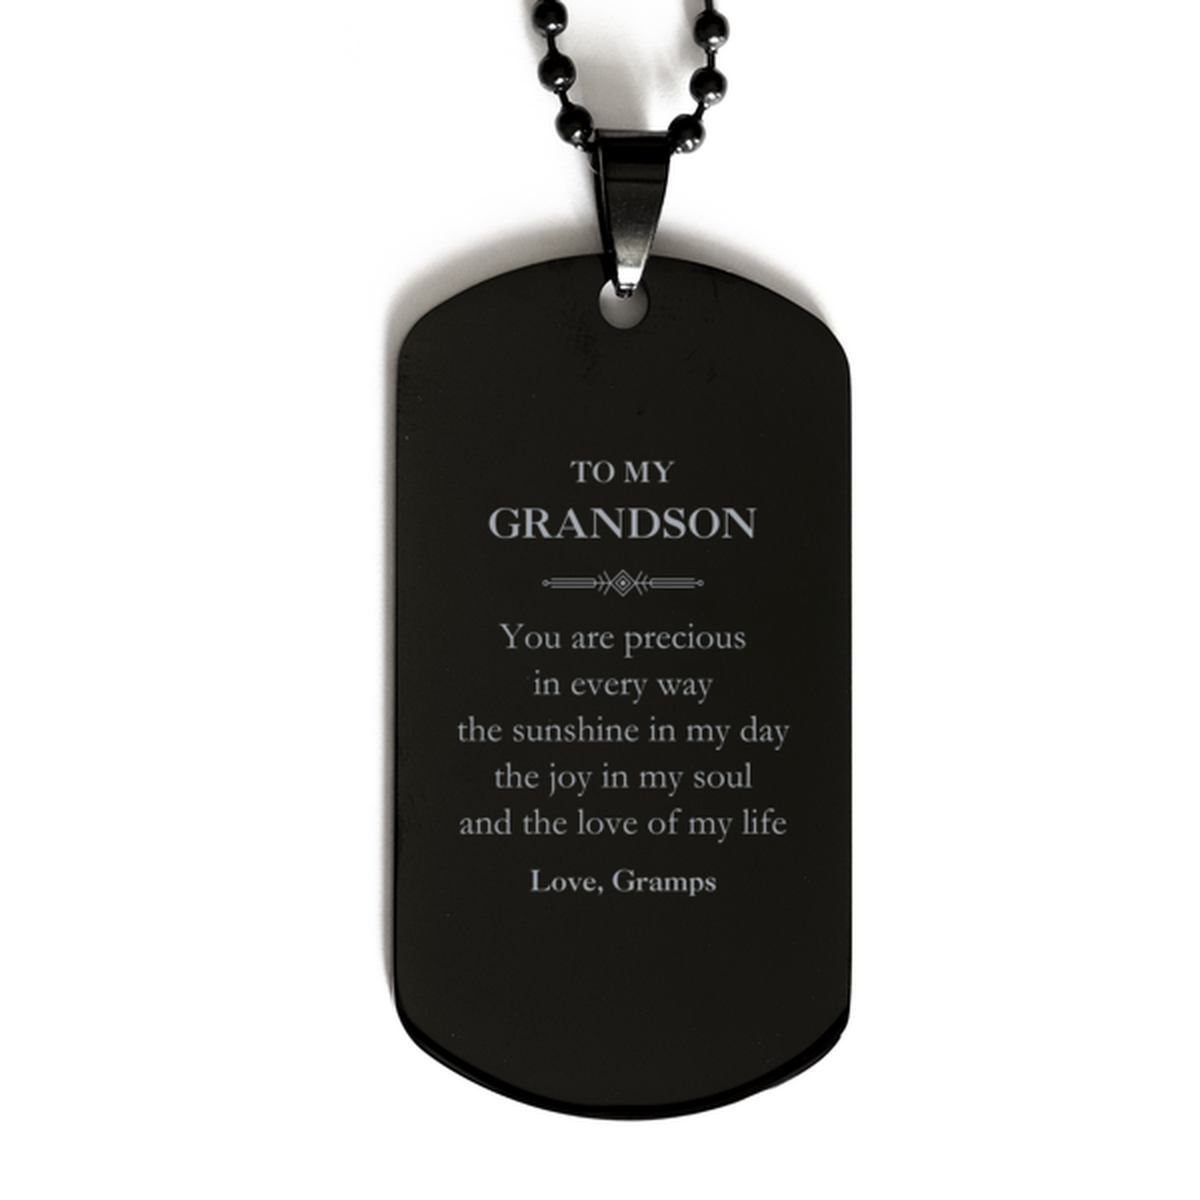 Graduation Gifts for Grandson Black Dog Tag Present from Gramps, Christmas Grandson Birthday Gifts Grandson You are precious in every way the sunshine in my day. Love, Gramps